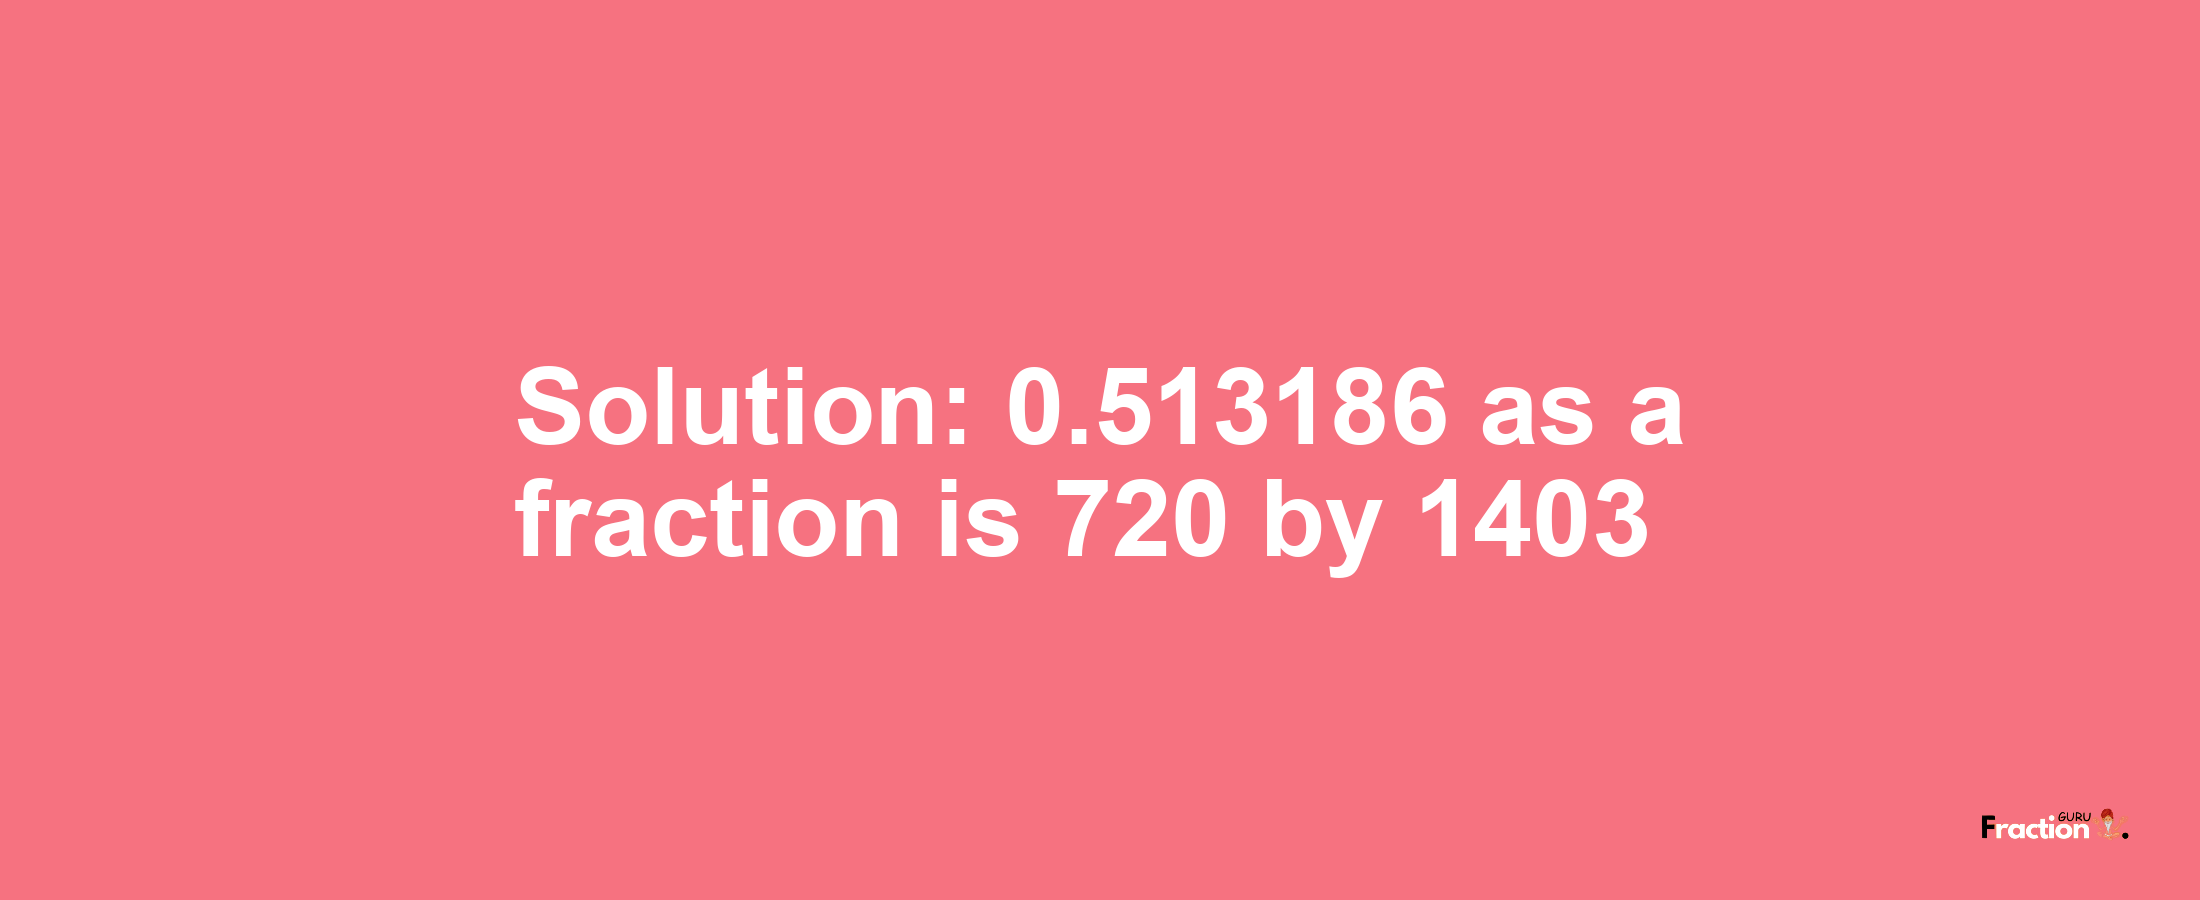 Solution:0.513186 as a fraction is 720/1403